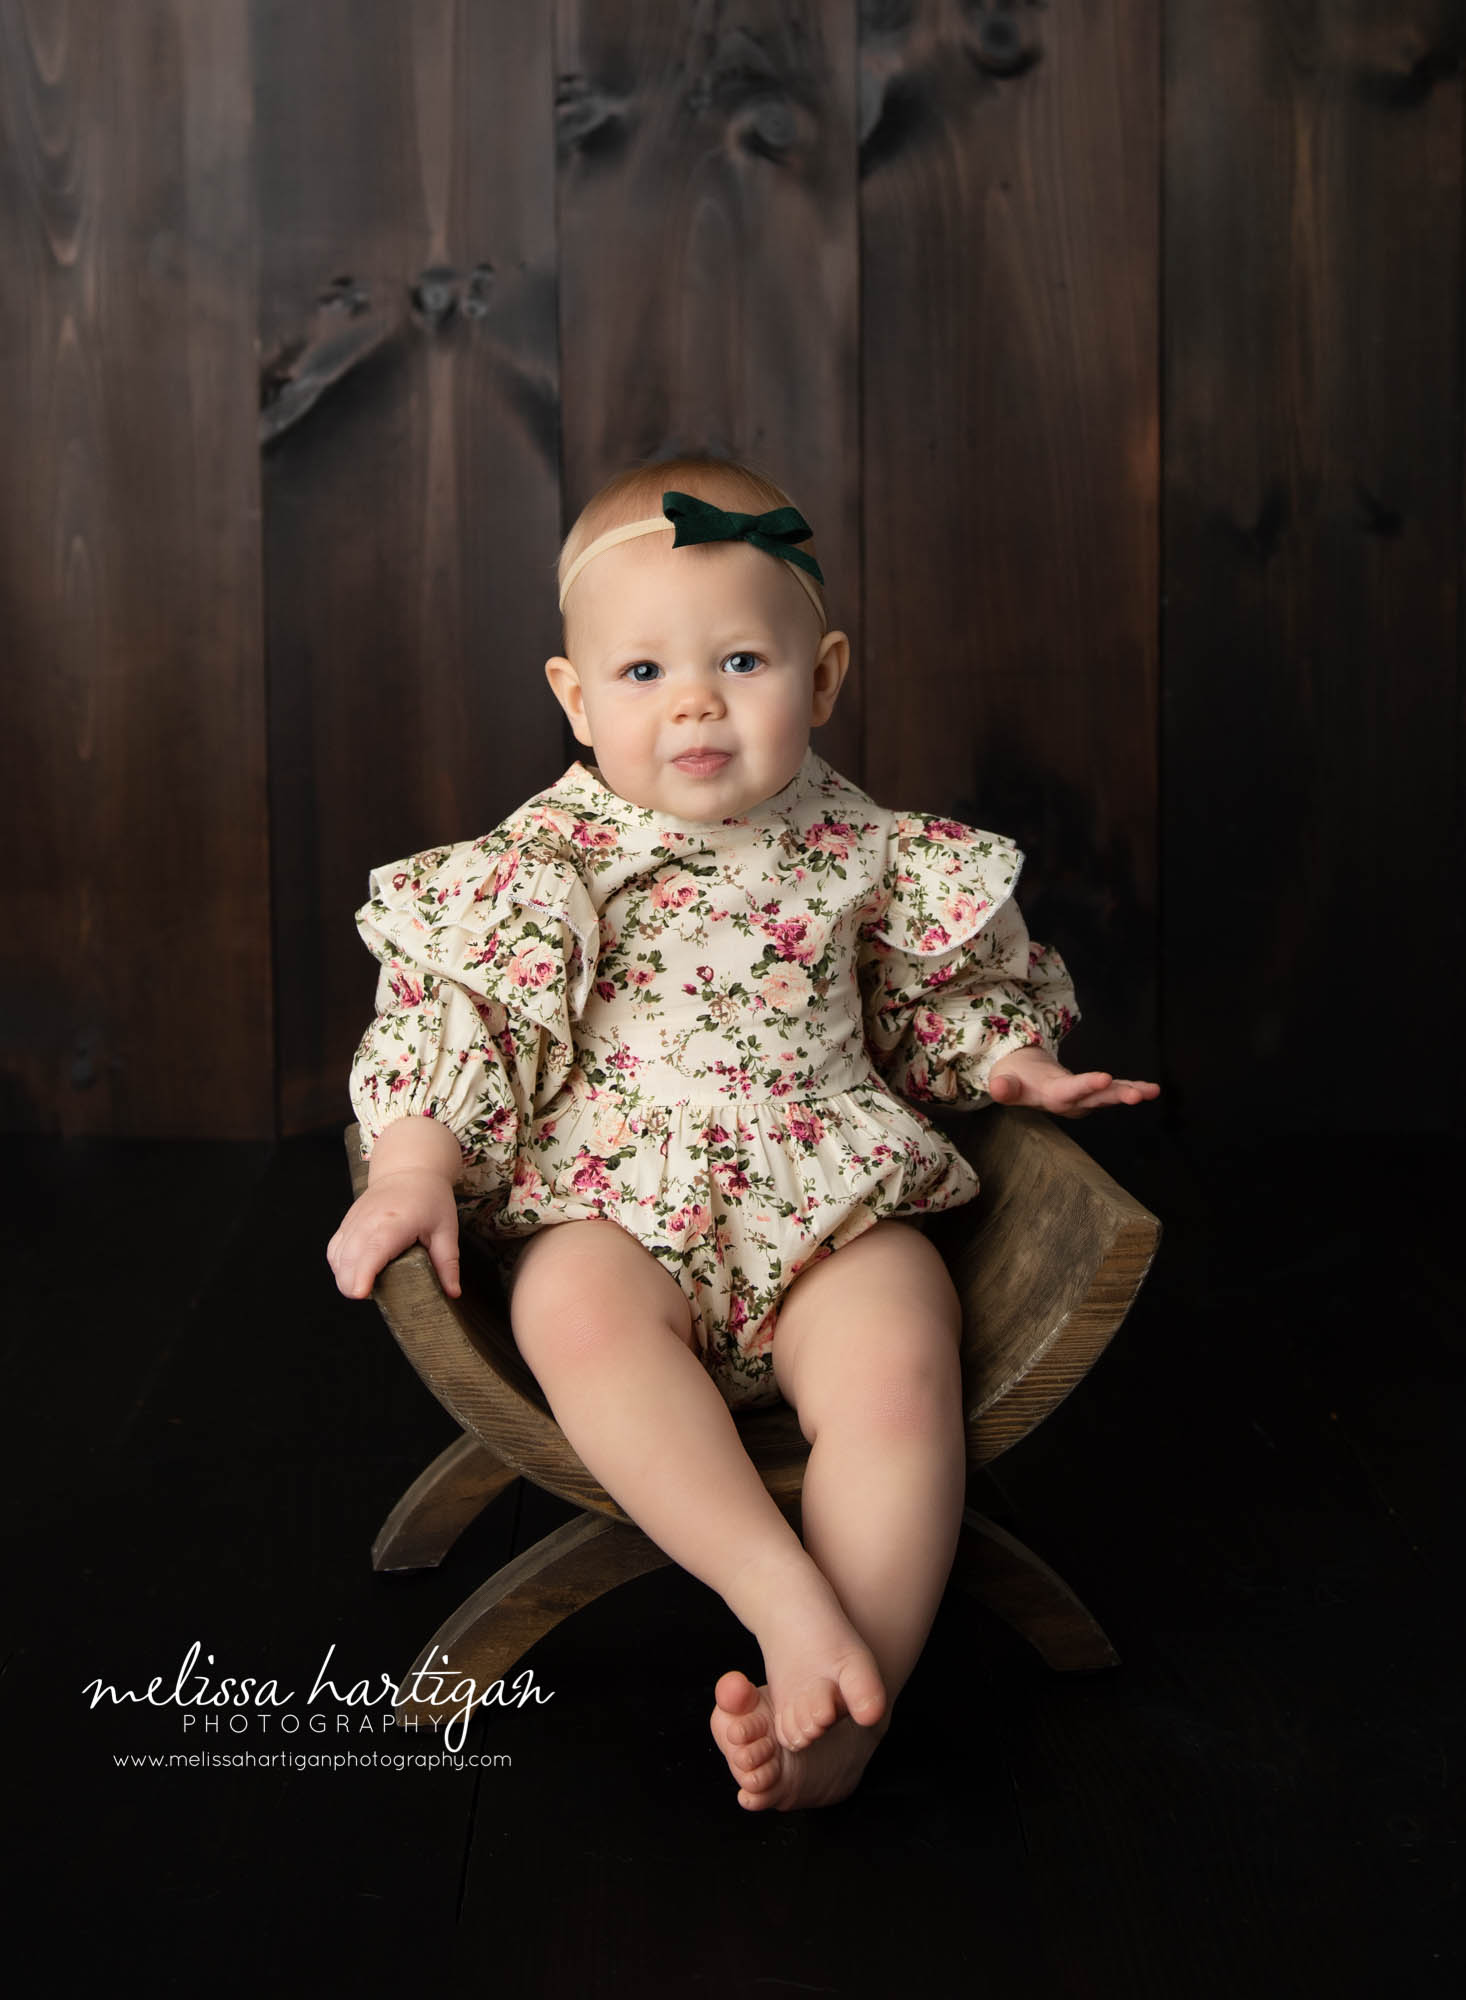 baby girl sitting in wooden bench wearing floral outfit masnfield CT baby photography